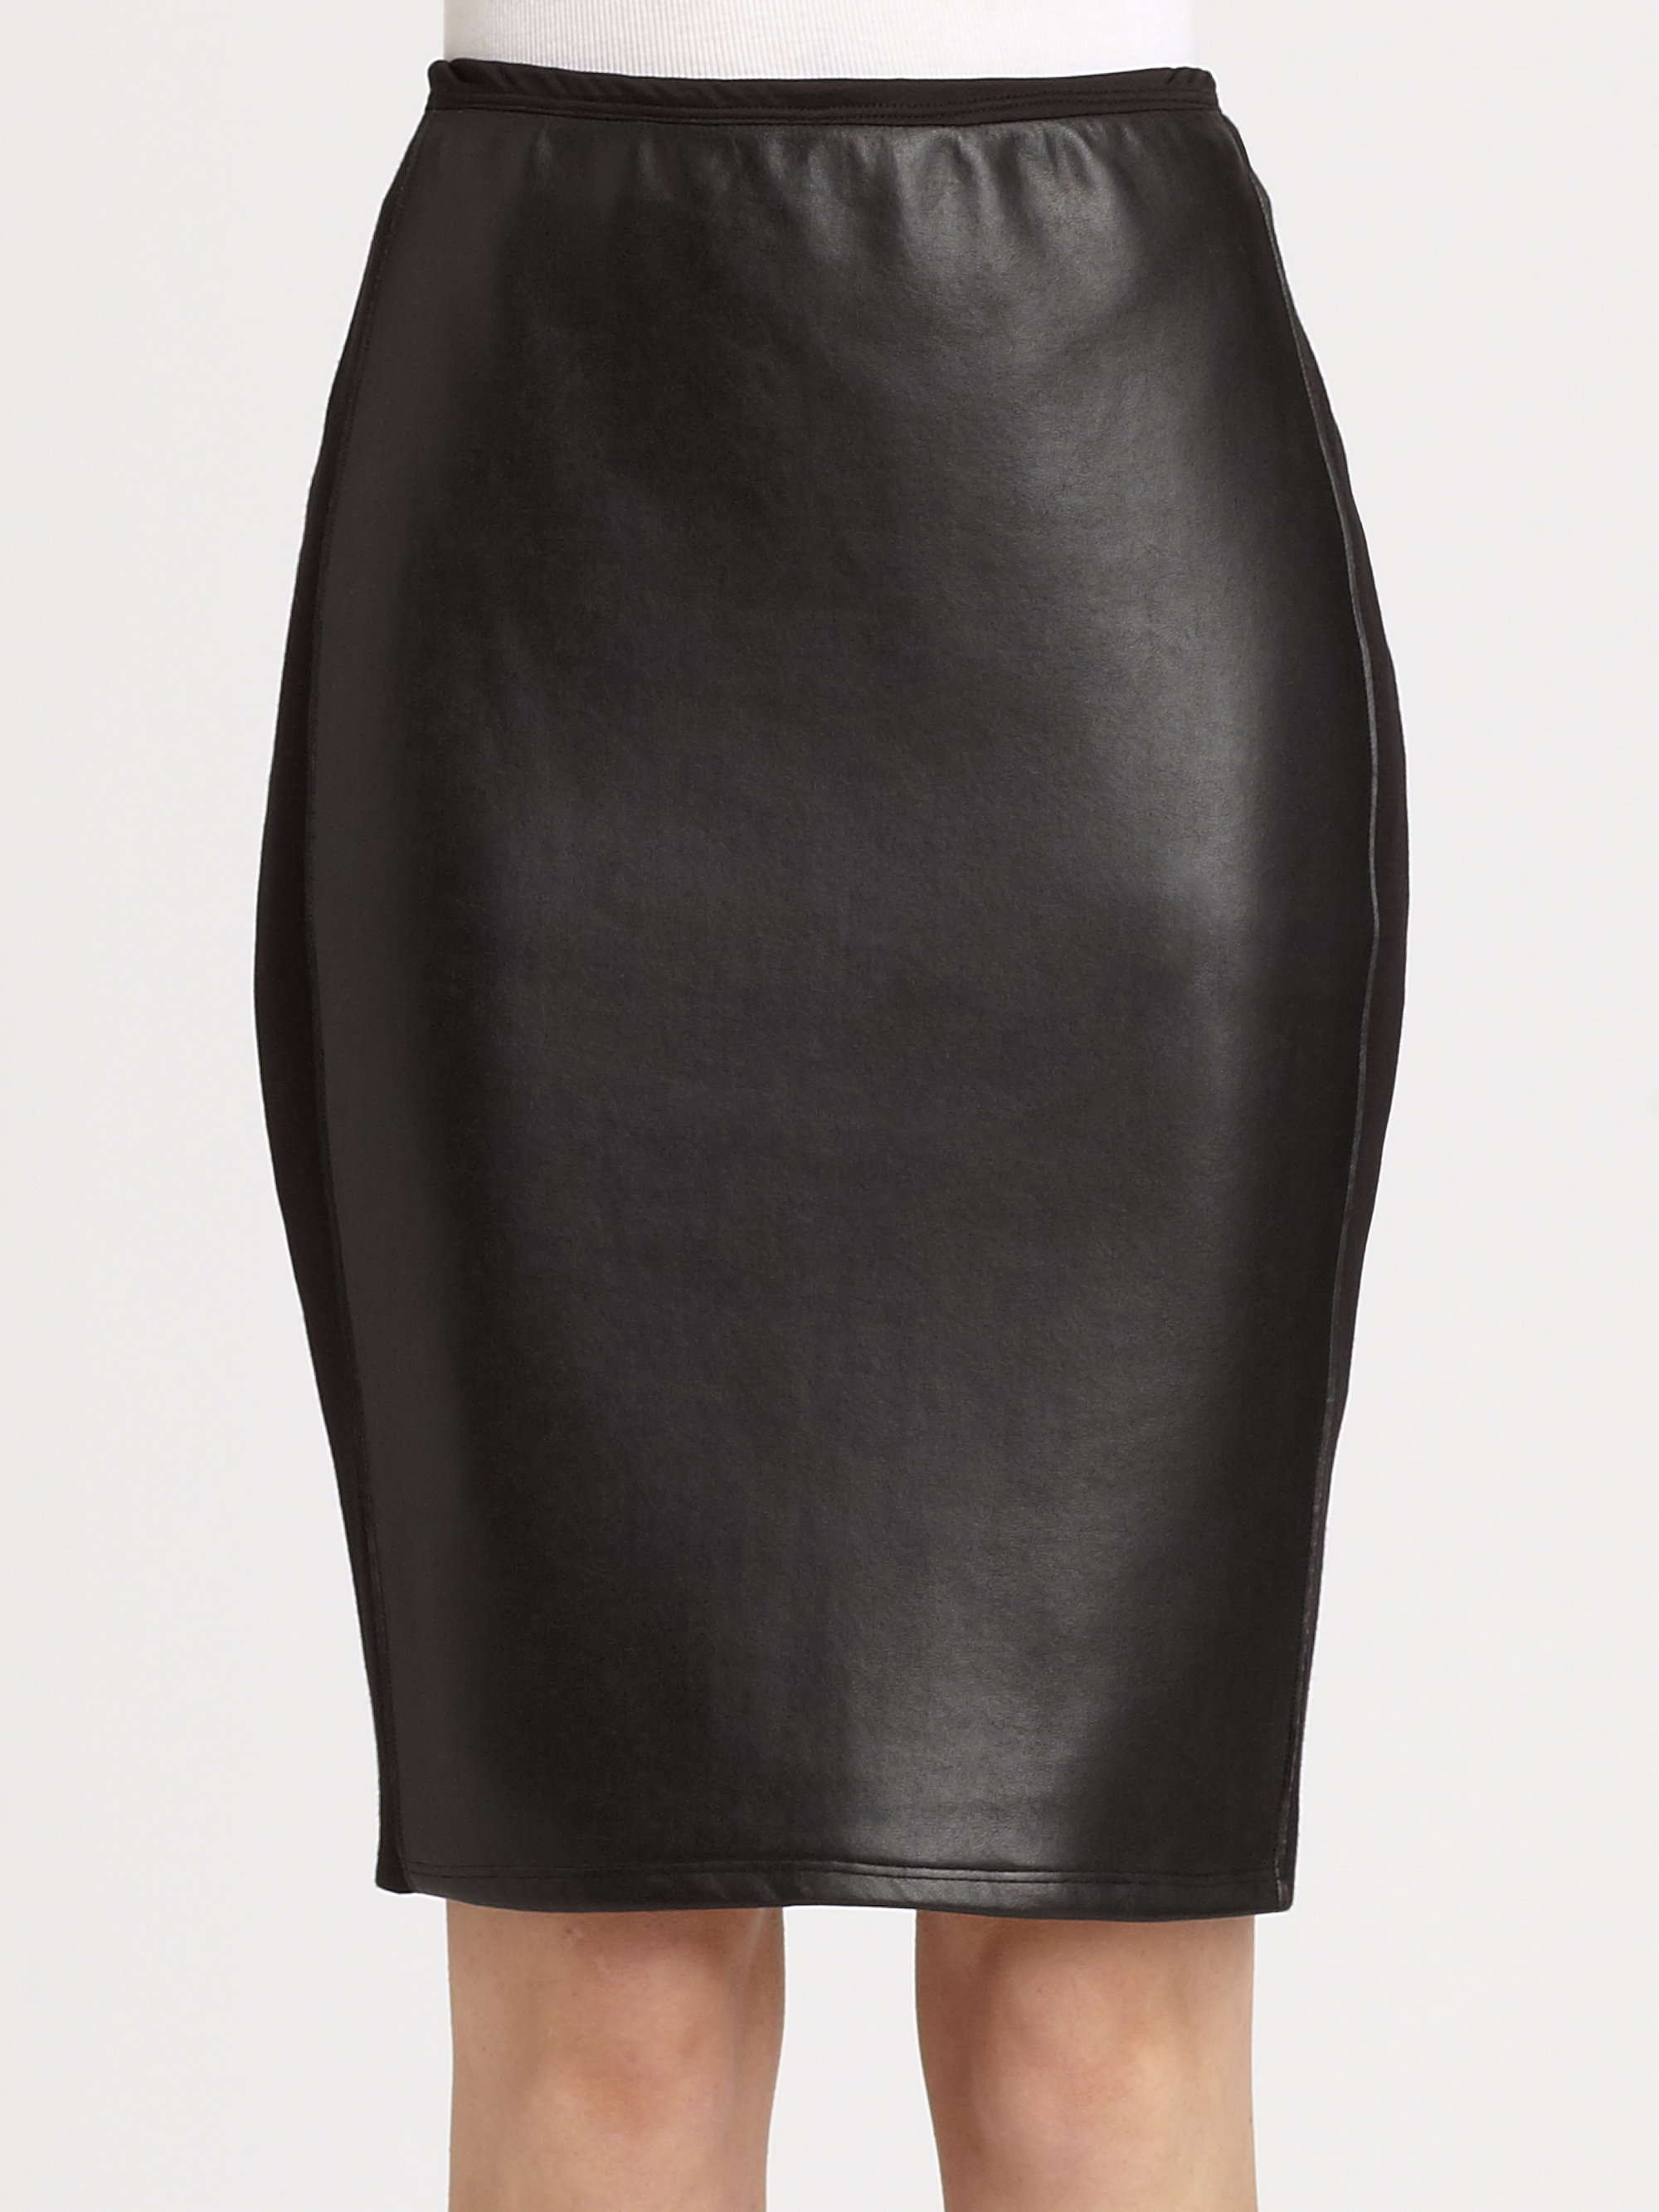 Lyst - Bailey 44 He Sat Faux Leather Skirt in Black